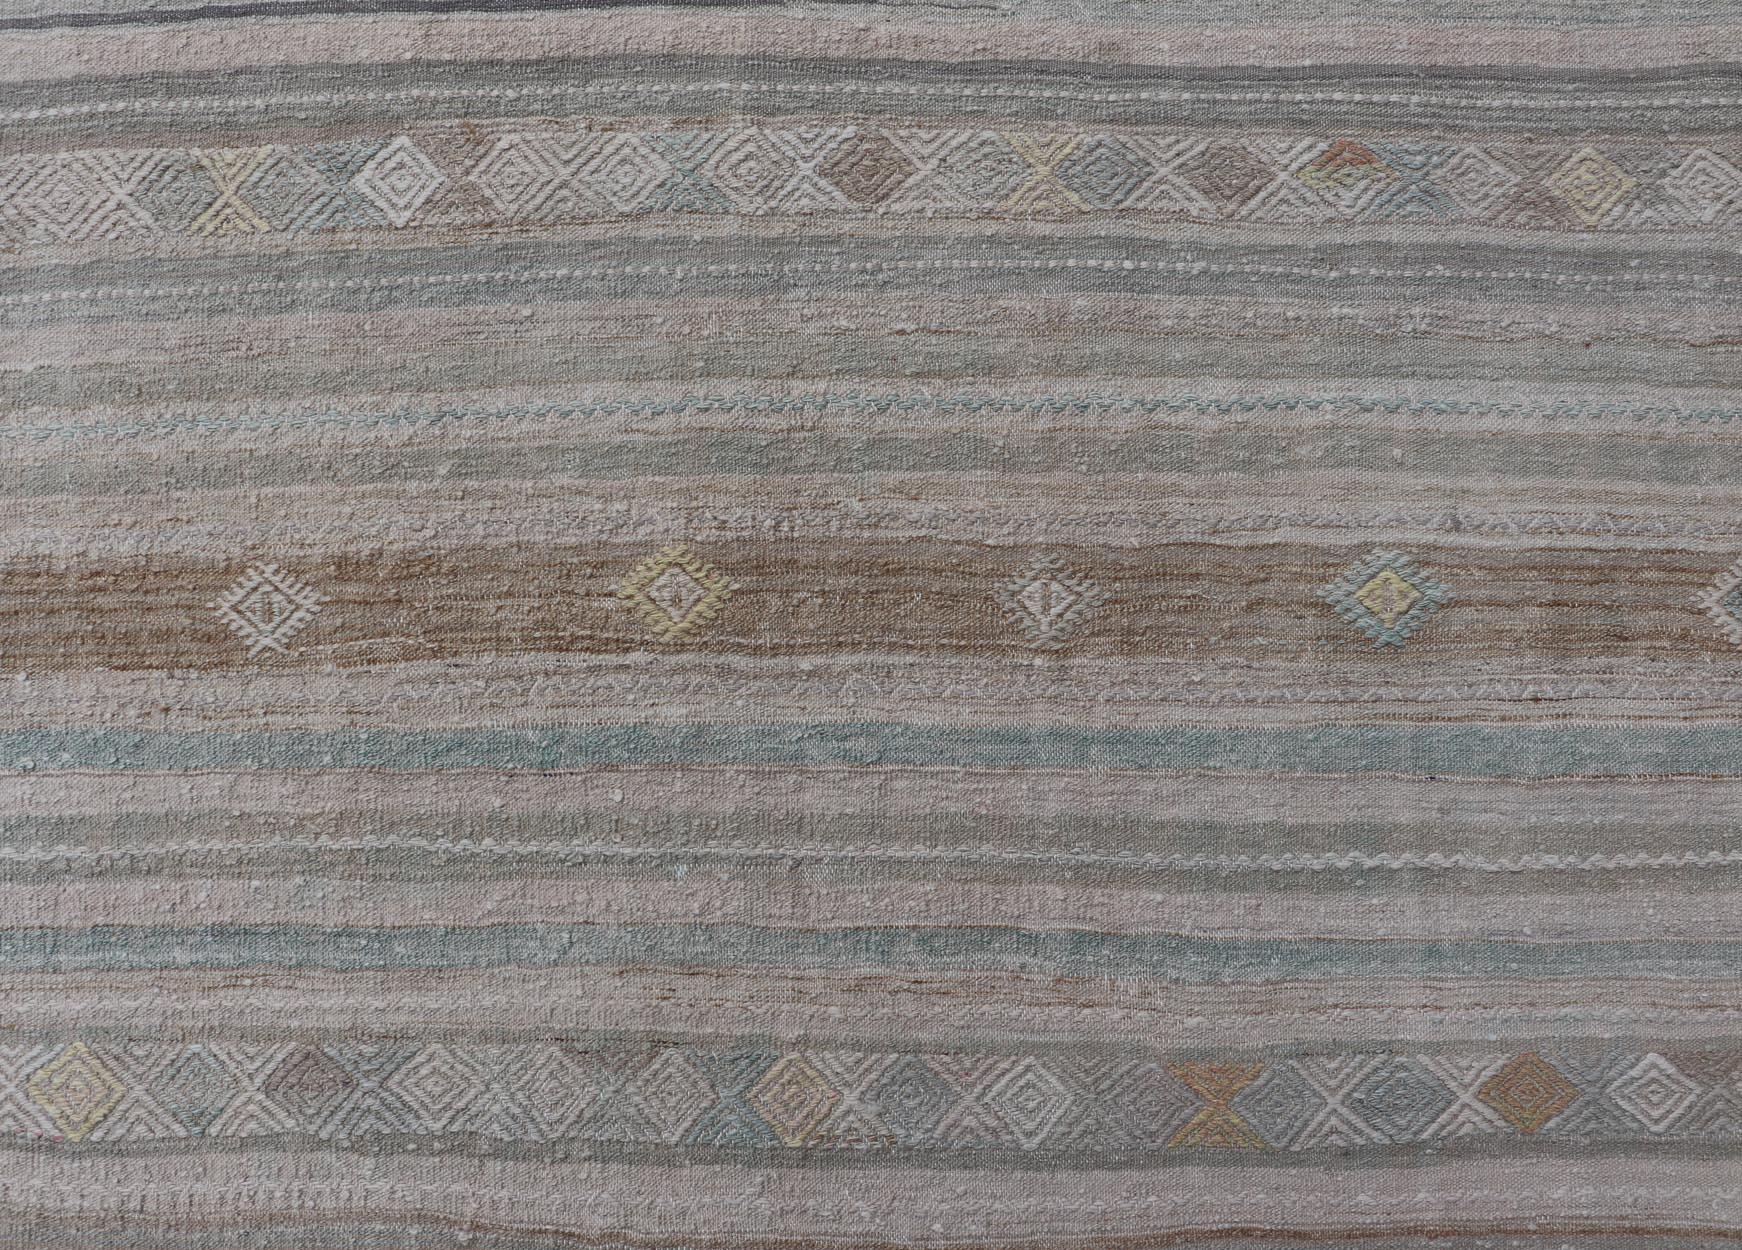 20th Century Turkish Flat-Weave Kilim with Embroideries in Taupe, Tan, Light Green, and Grey For Sale